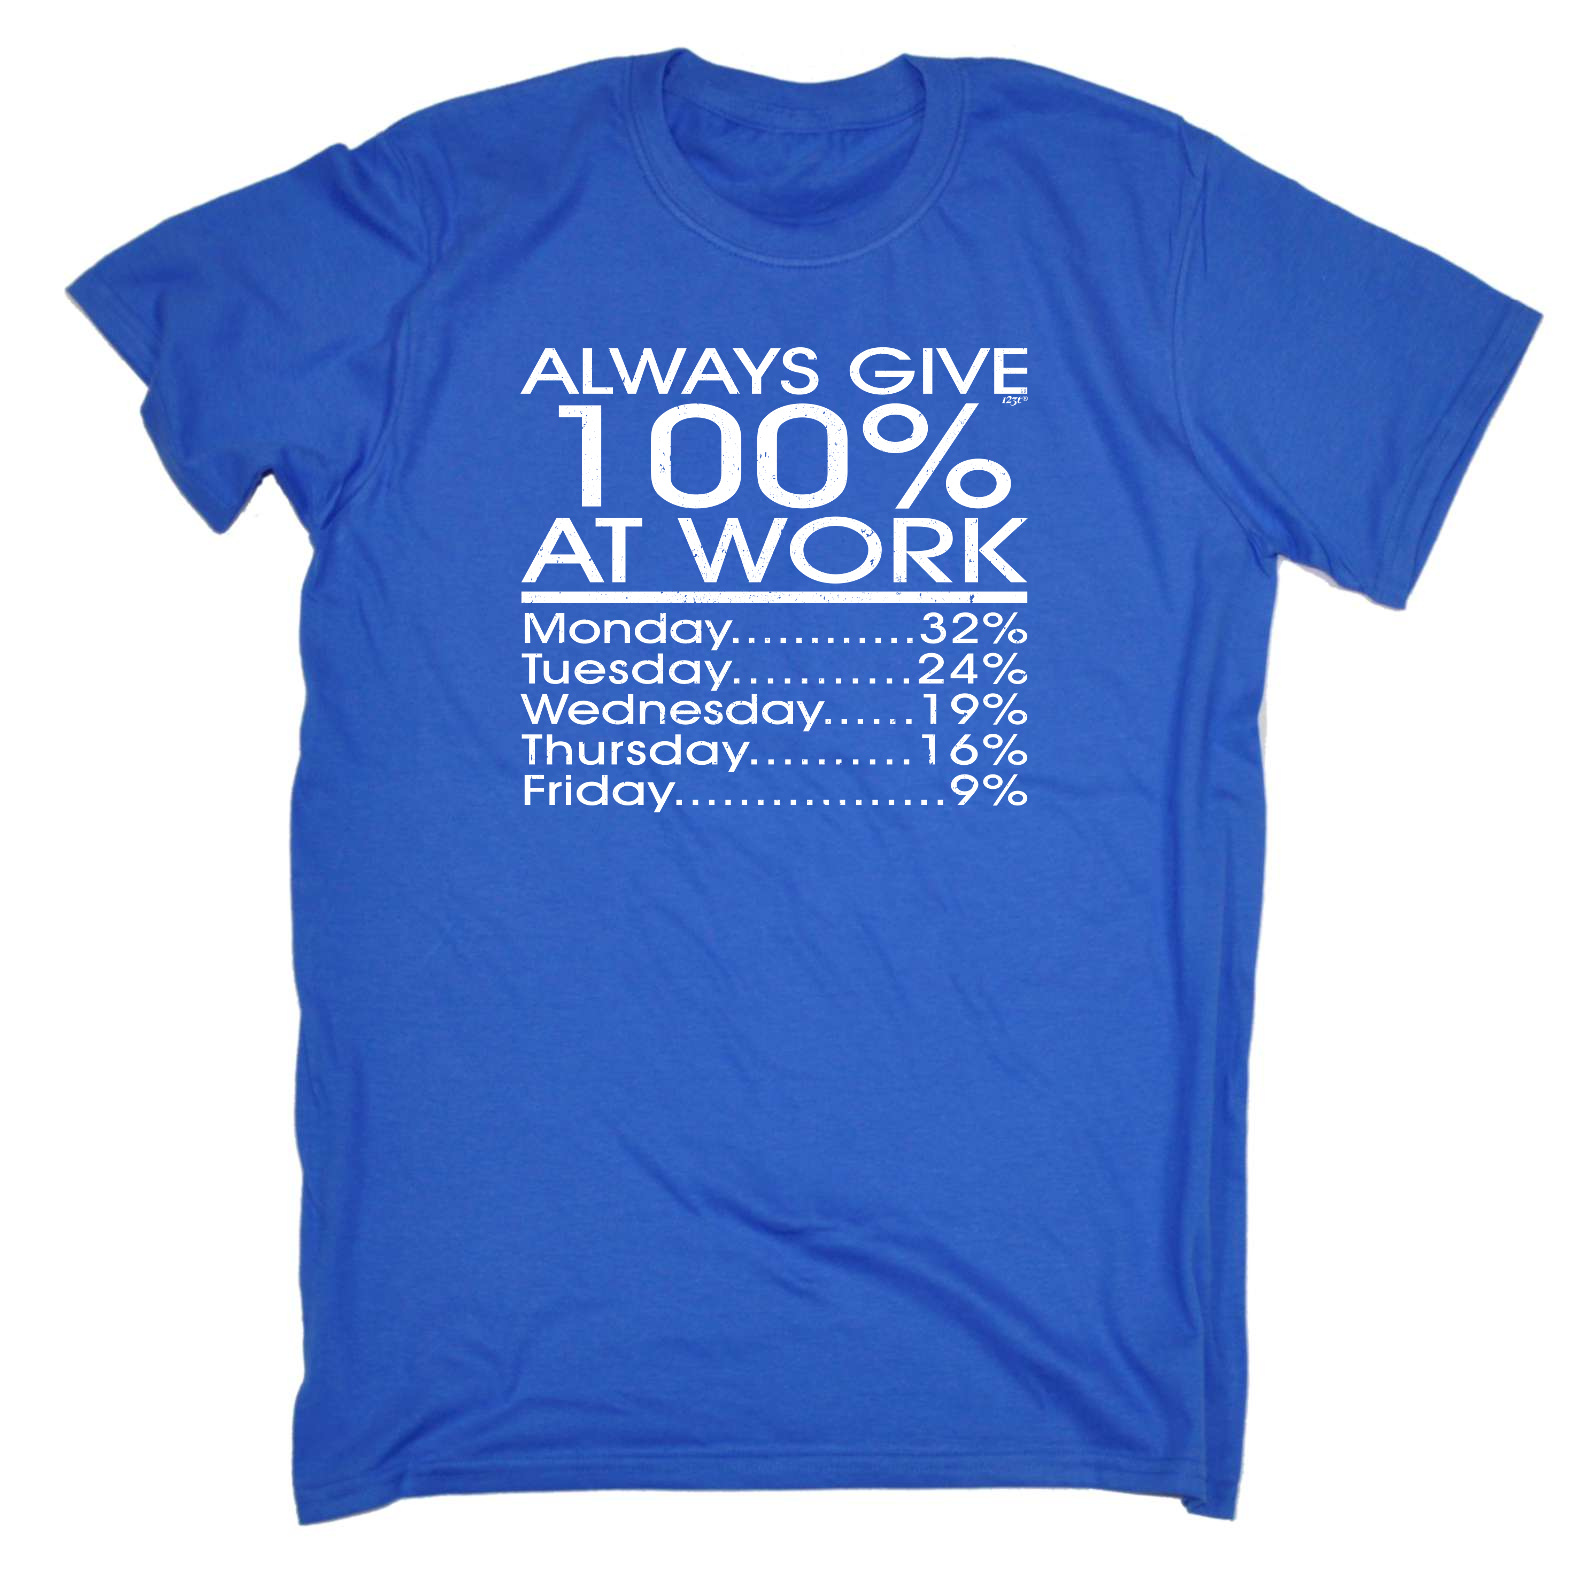 Always Give 100% at Work T-shirt Funny Shirts – Jon's Imports Inc